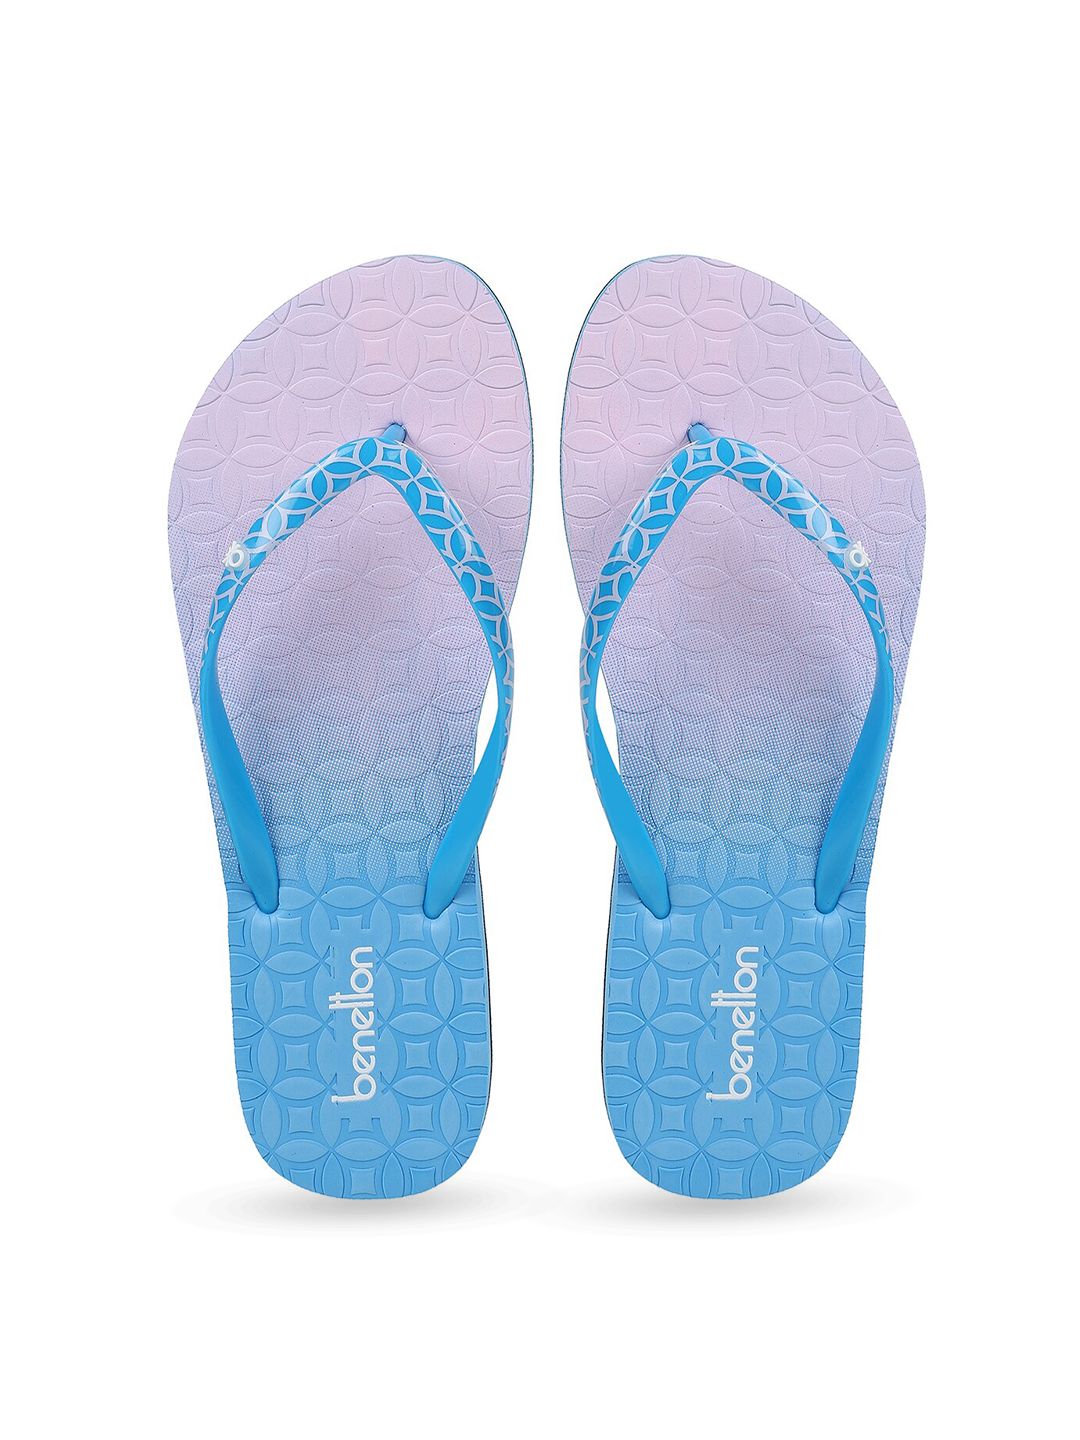 United Colors of Benetton Women Blue & Pink Printed Rubber Thong Flip-Flops Price in India